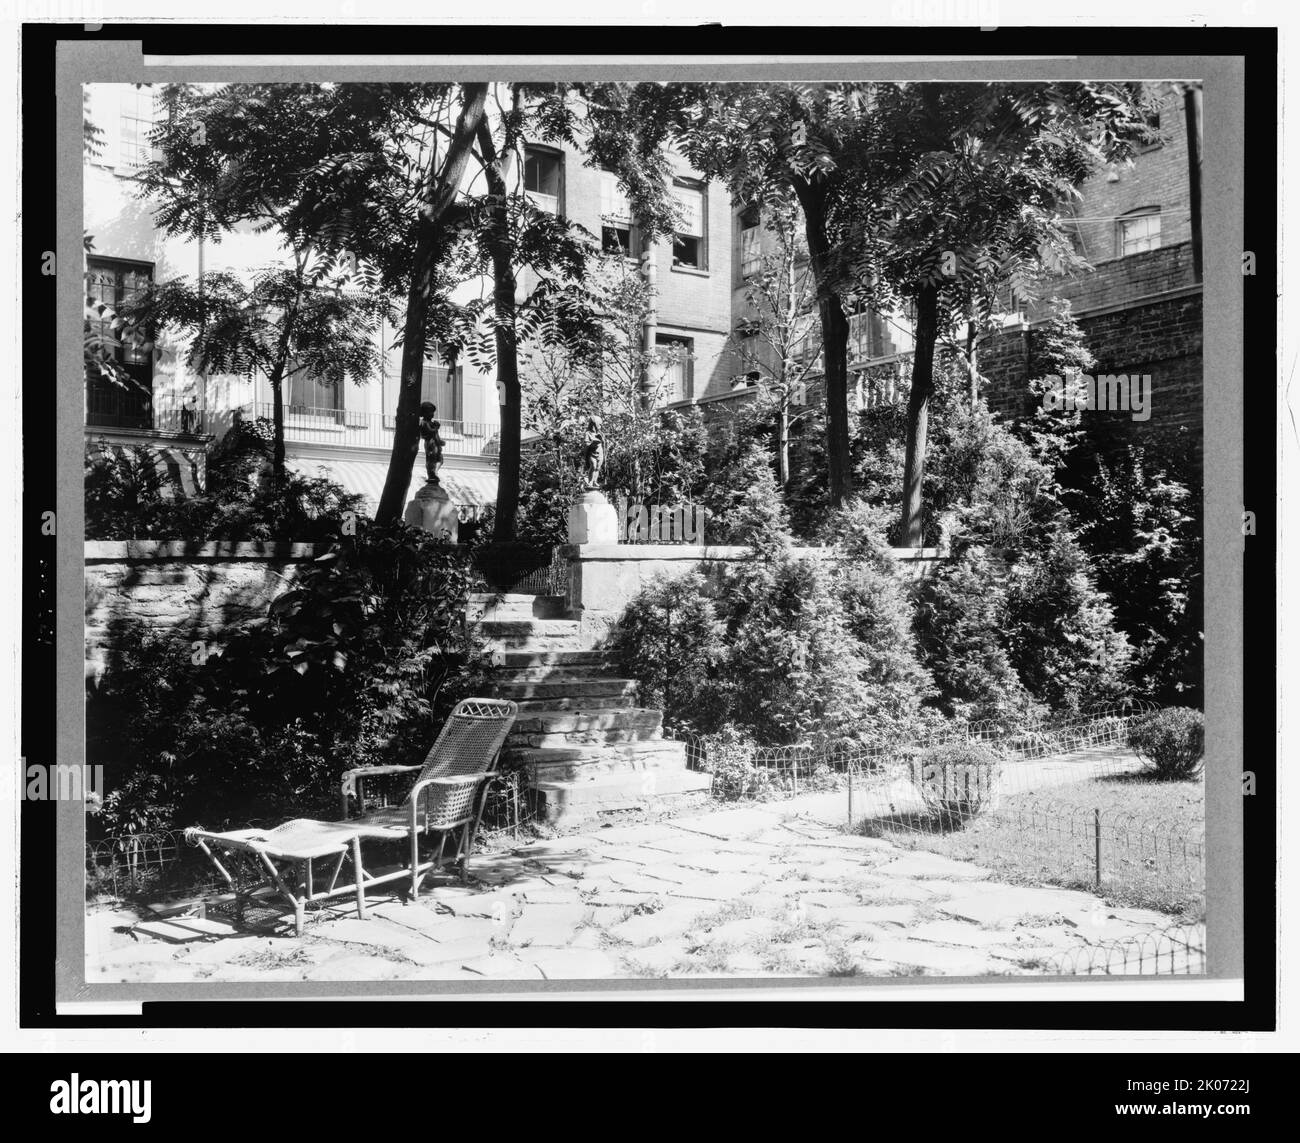 Patio and gardens in New York City, 1921. Photograph shows garden and patio behind residential buildings in Jones Wood, New York City. Stock Photo